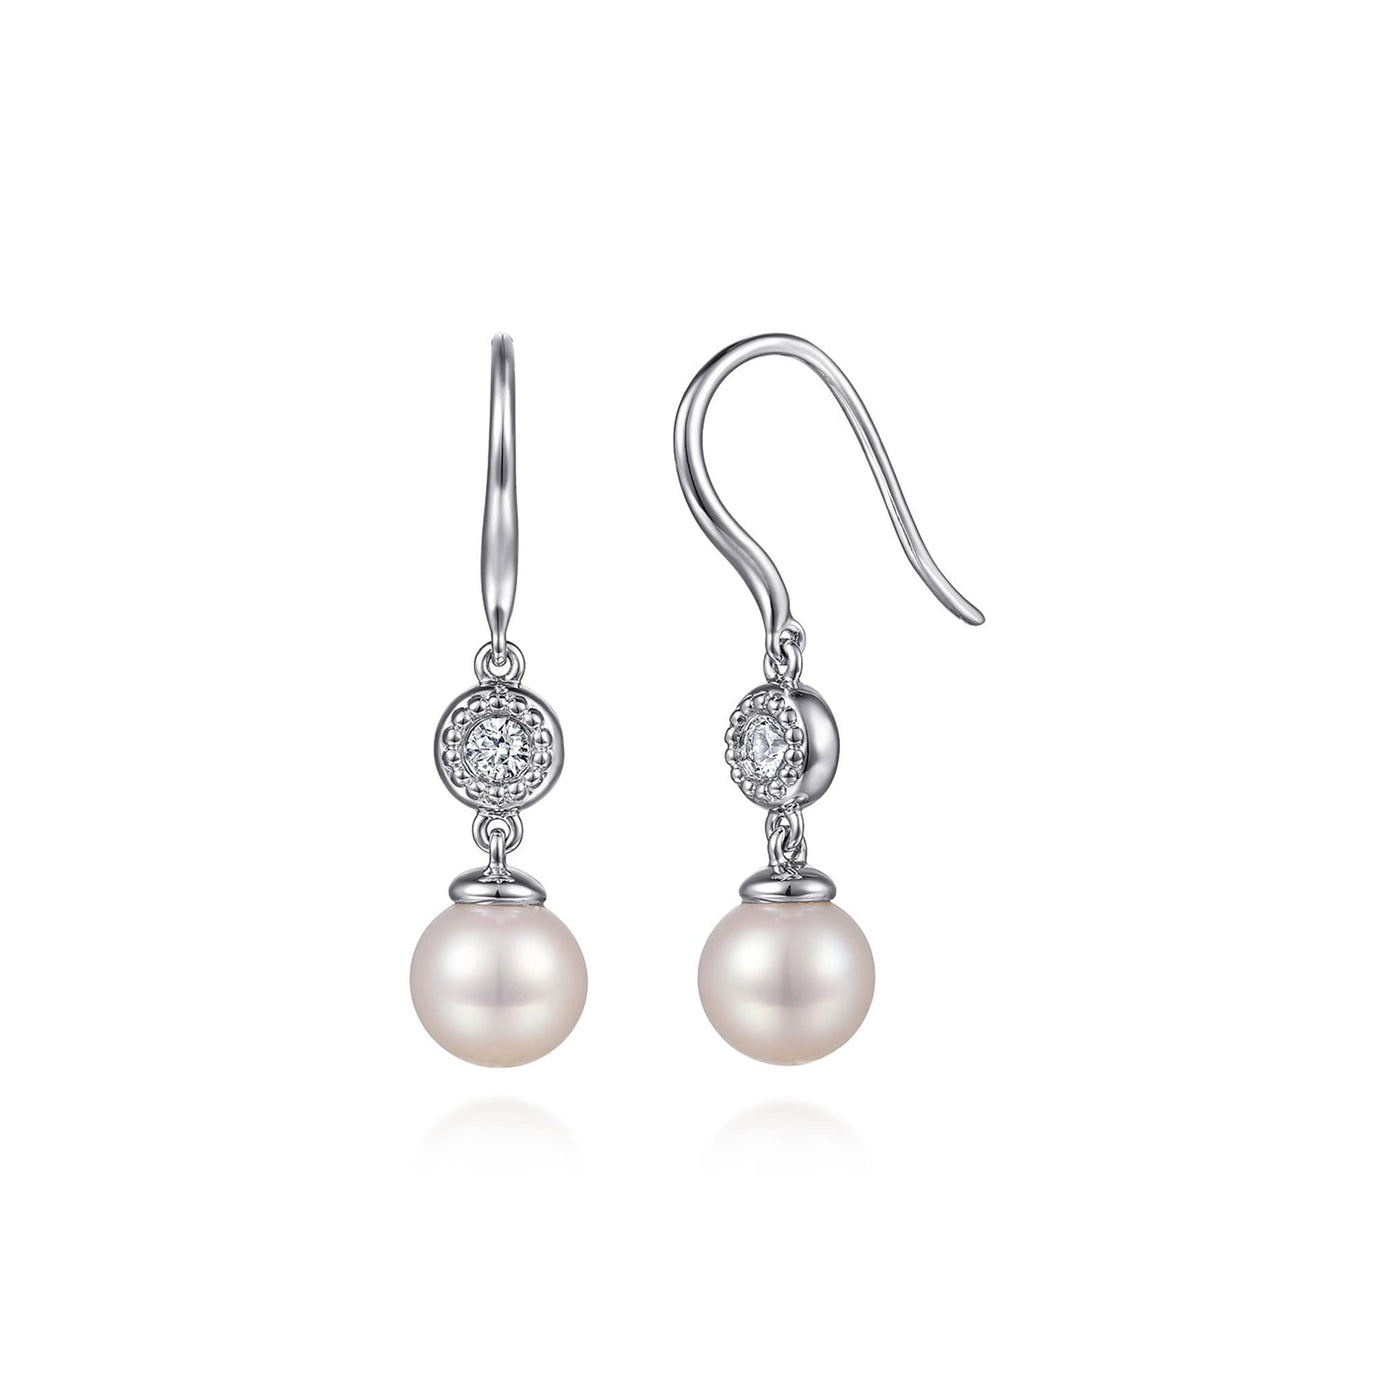 Gabriel Sterling Silver 1.74ctw Drop Style Earrings Featuring Freshwater Pearls and Sapphires